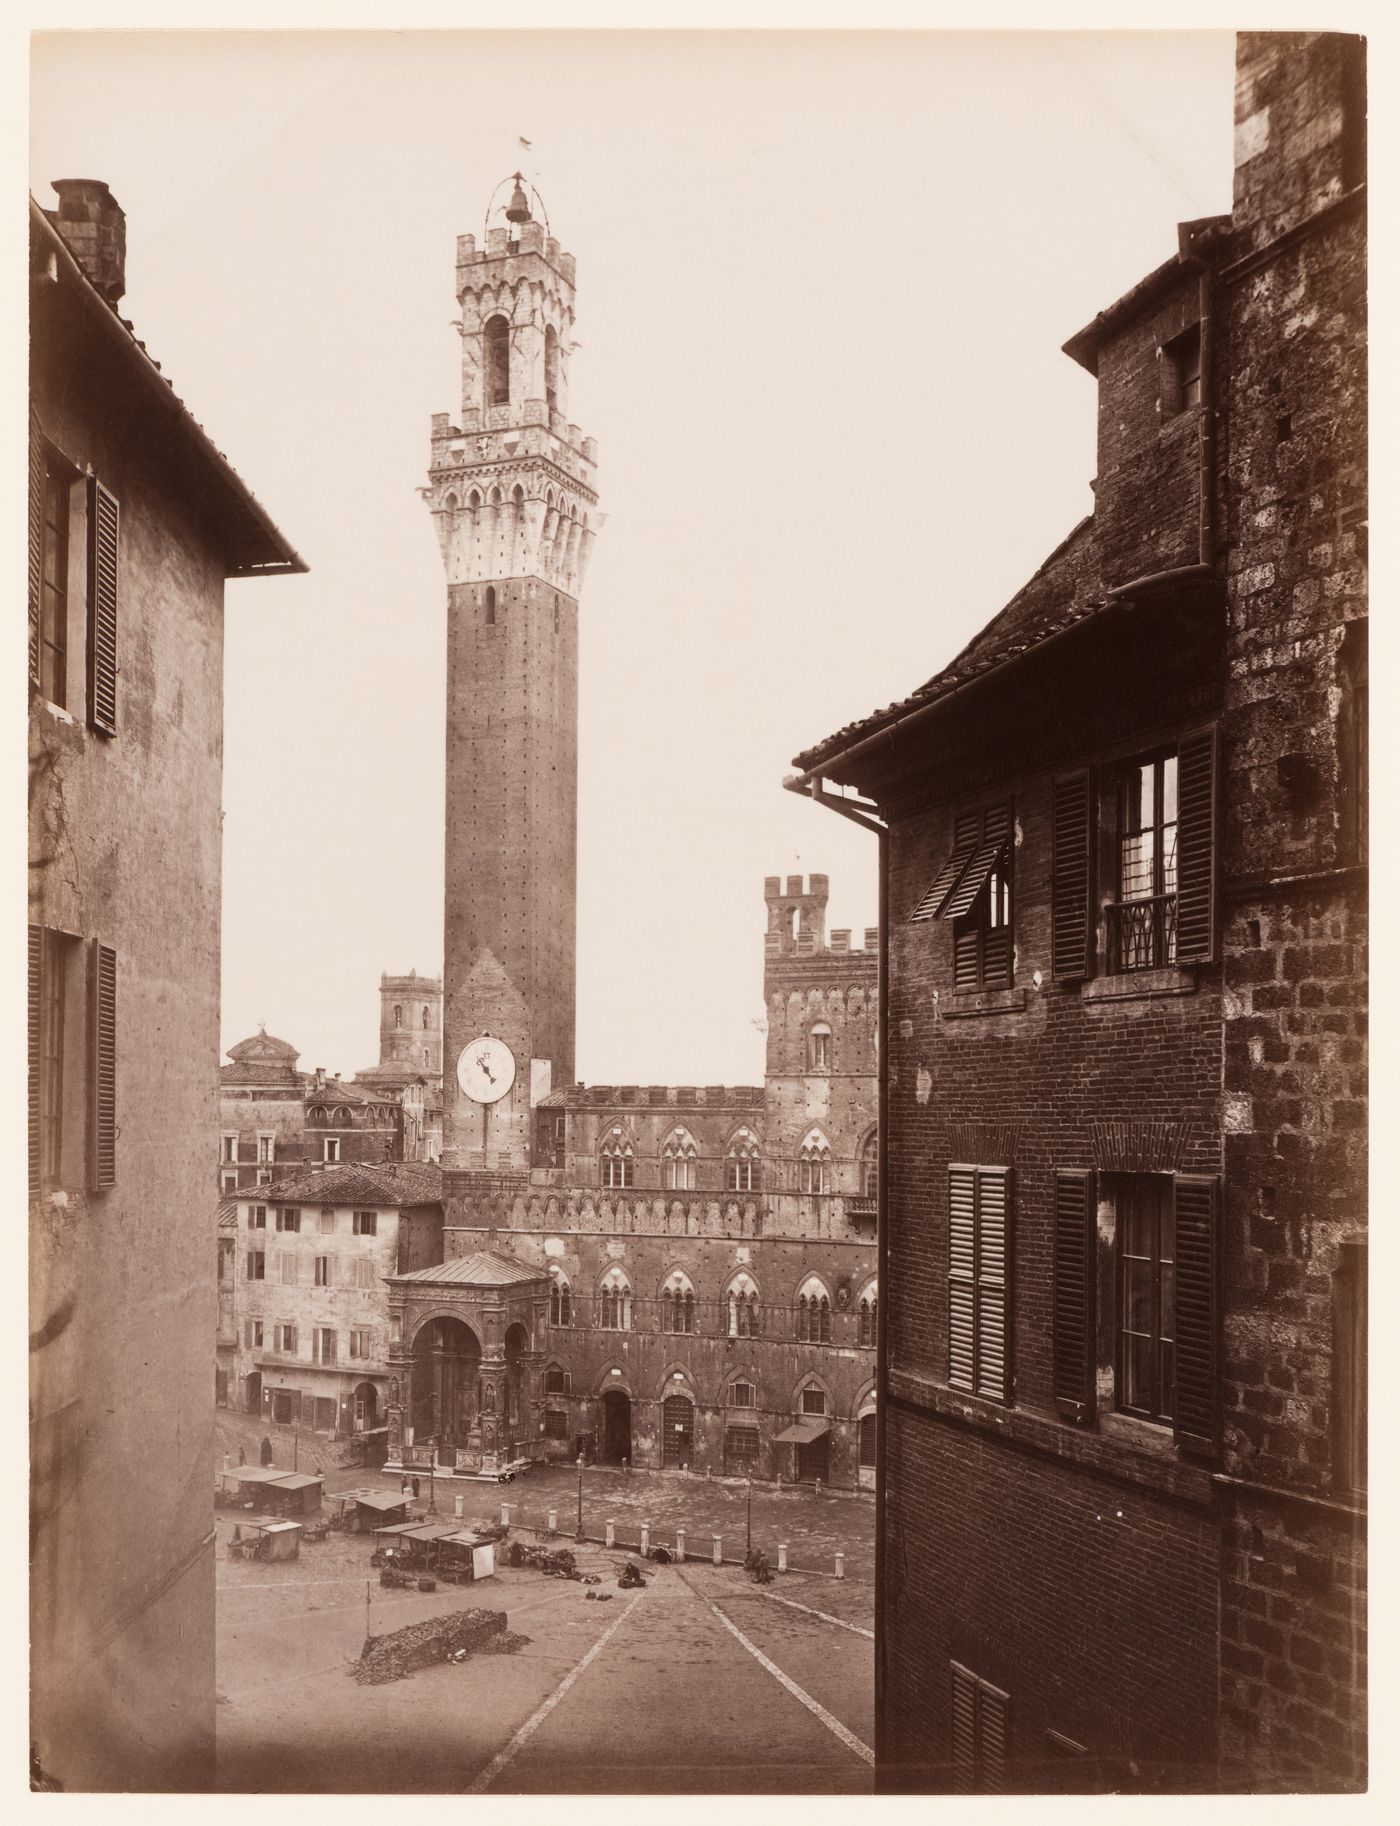 Partial view of the Piazza del Campo and the Palazzo pubblico, Siena, Italy